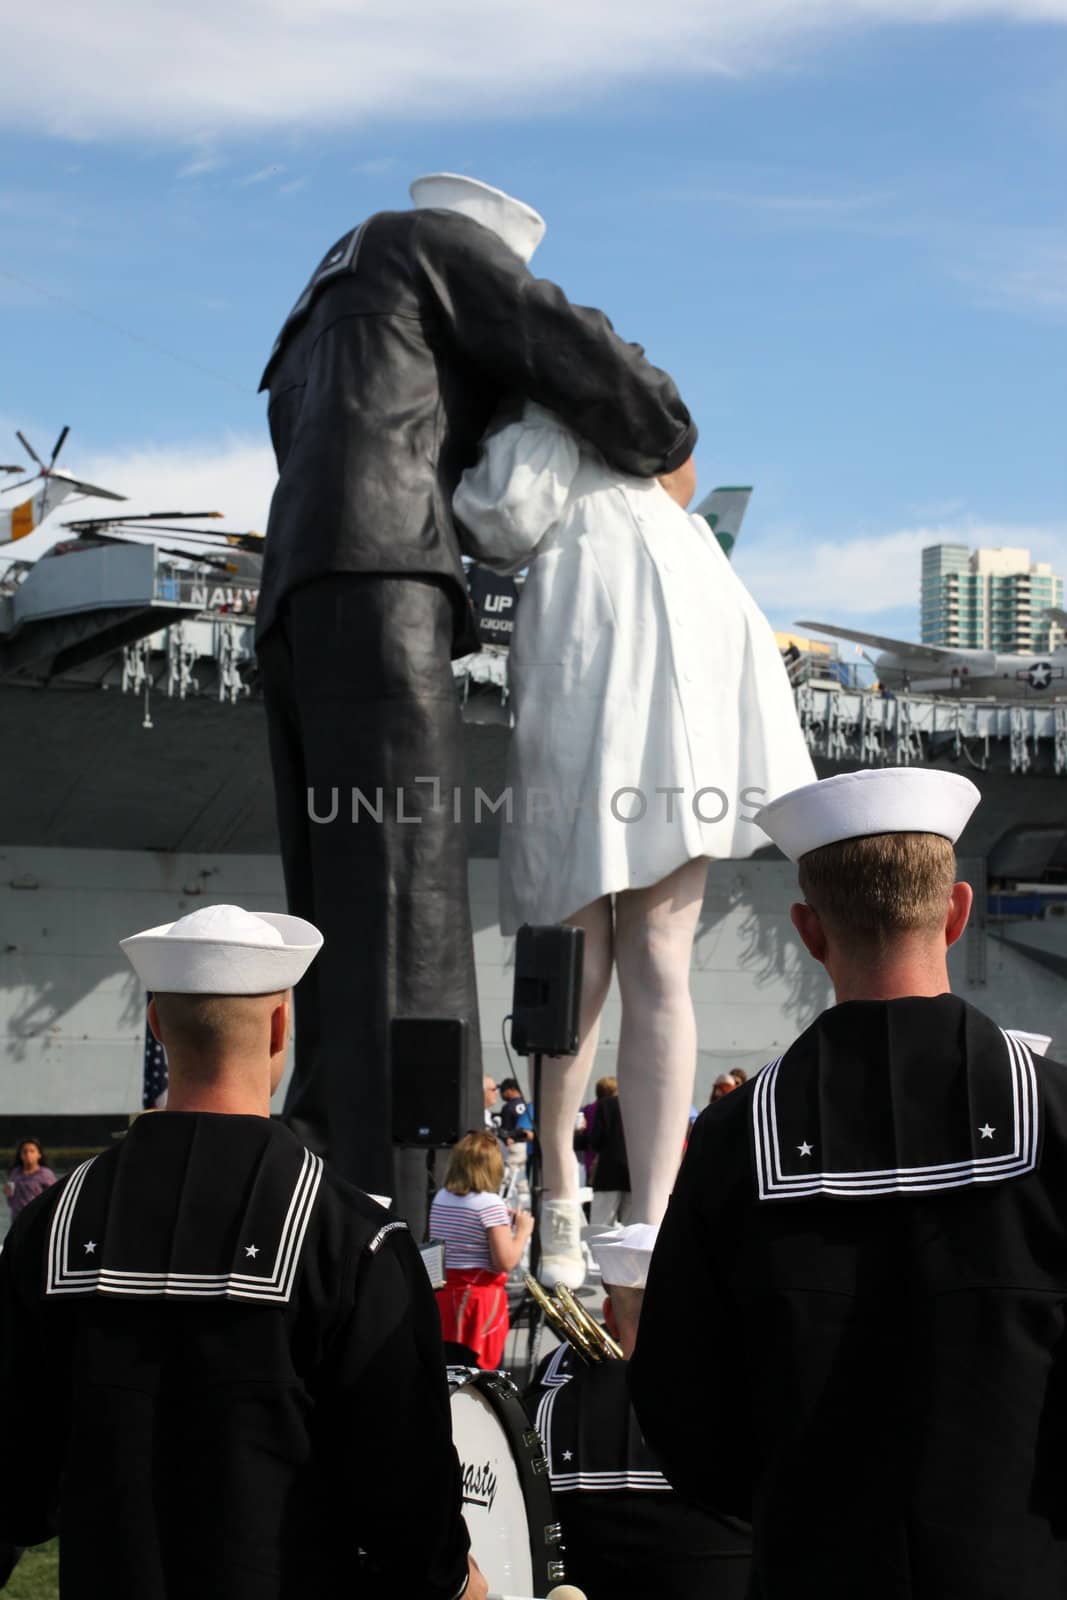 San Diego WWII Kiss Statue Ceremony by hlehnerer